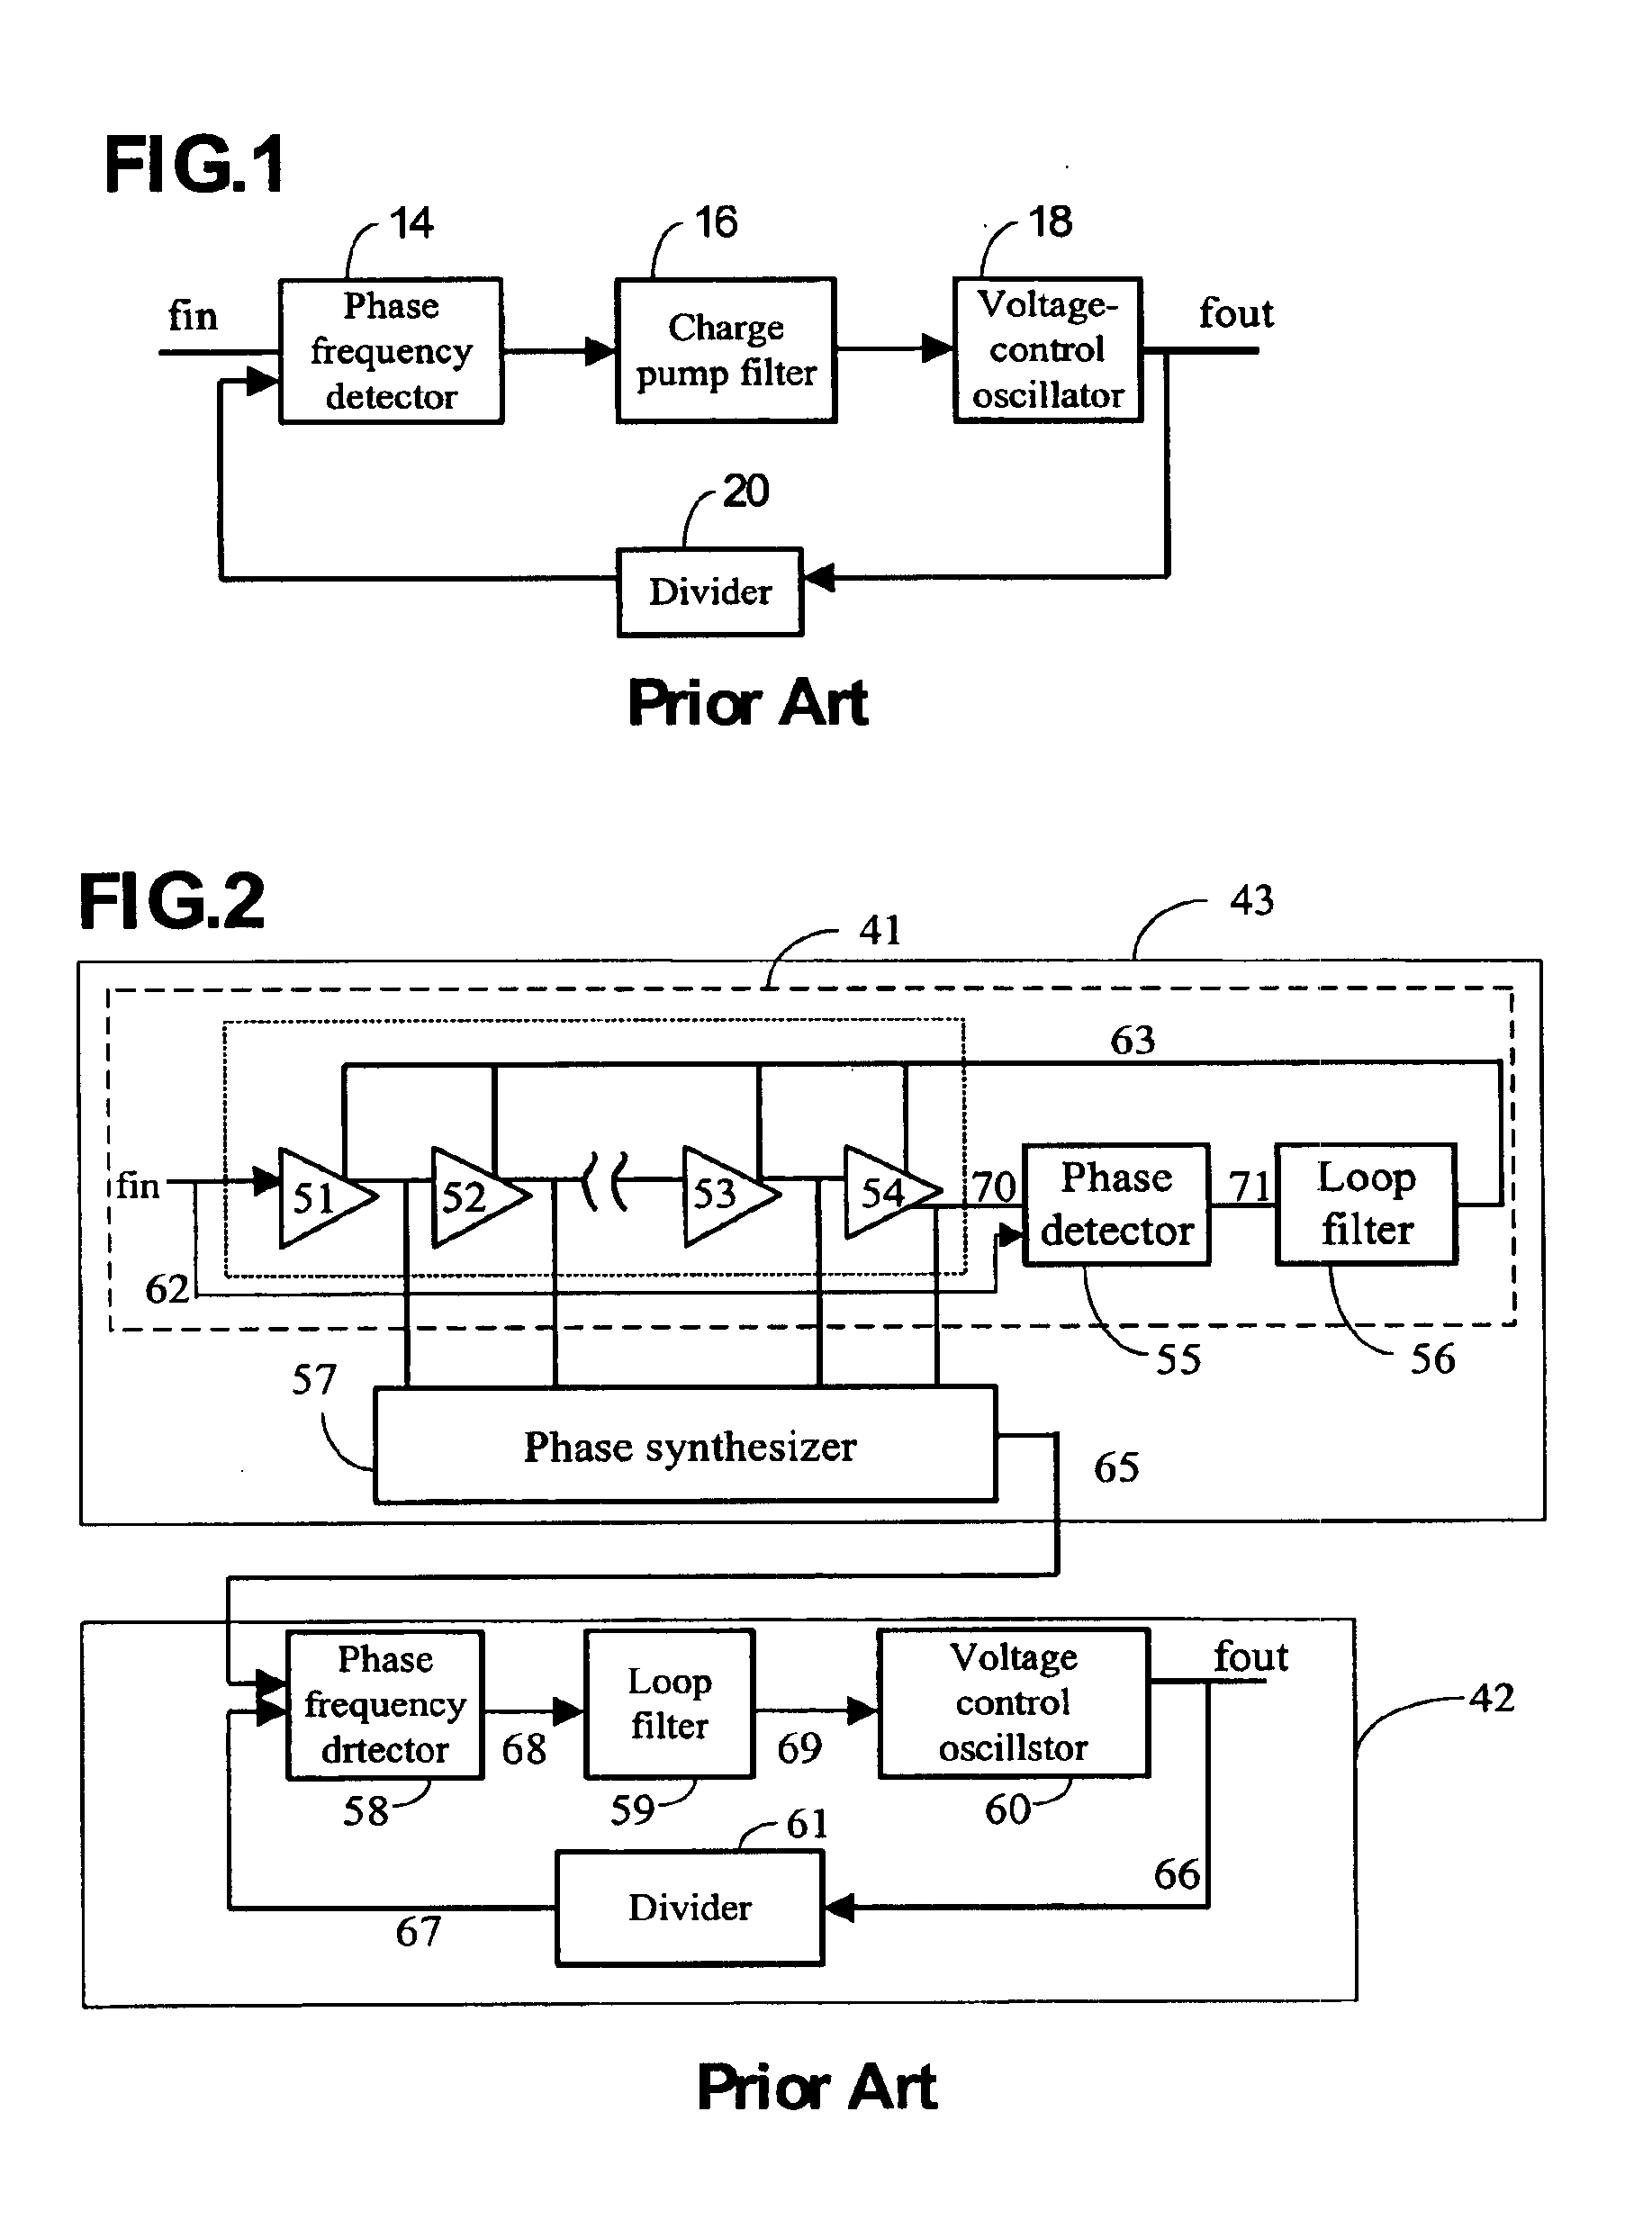 Frequency synthesizing circuit having a frequency multiplier for an output PLL reference signal